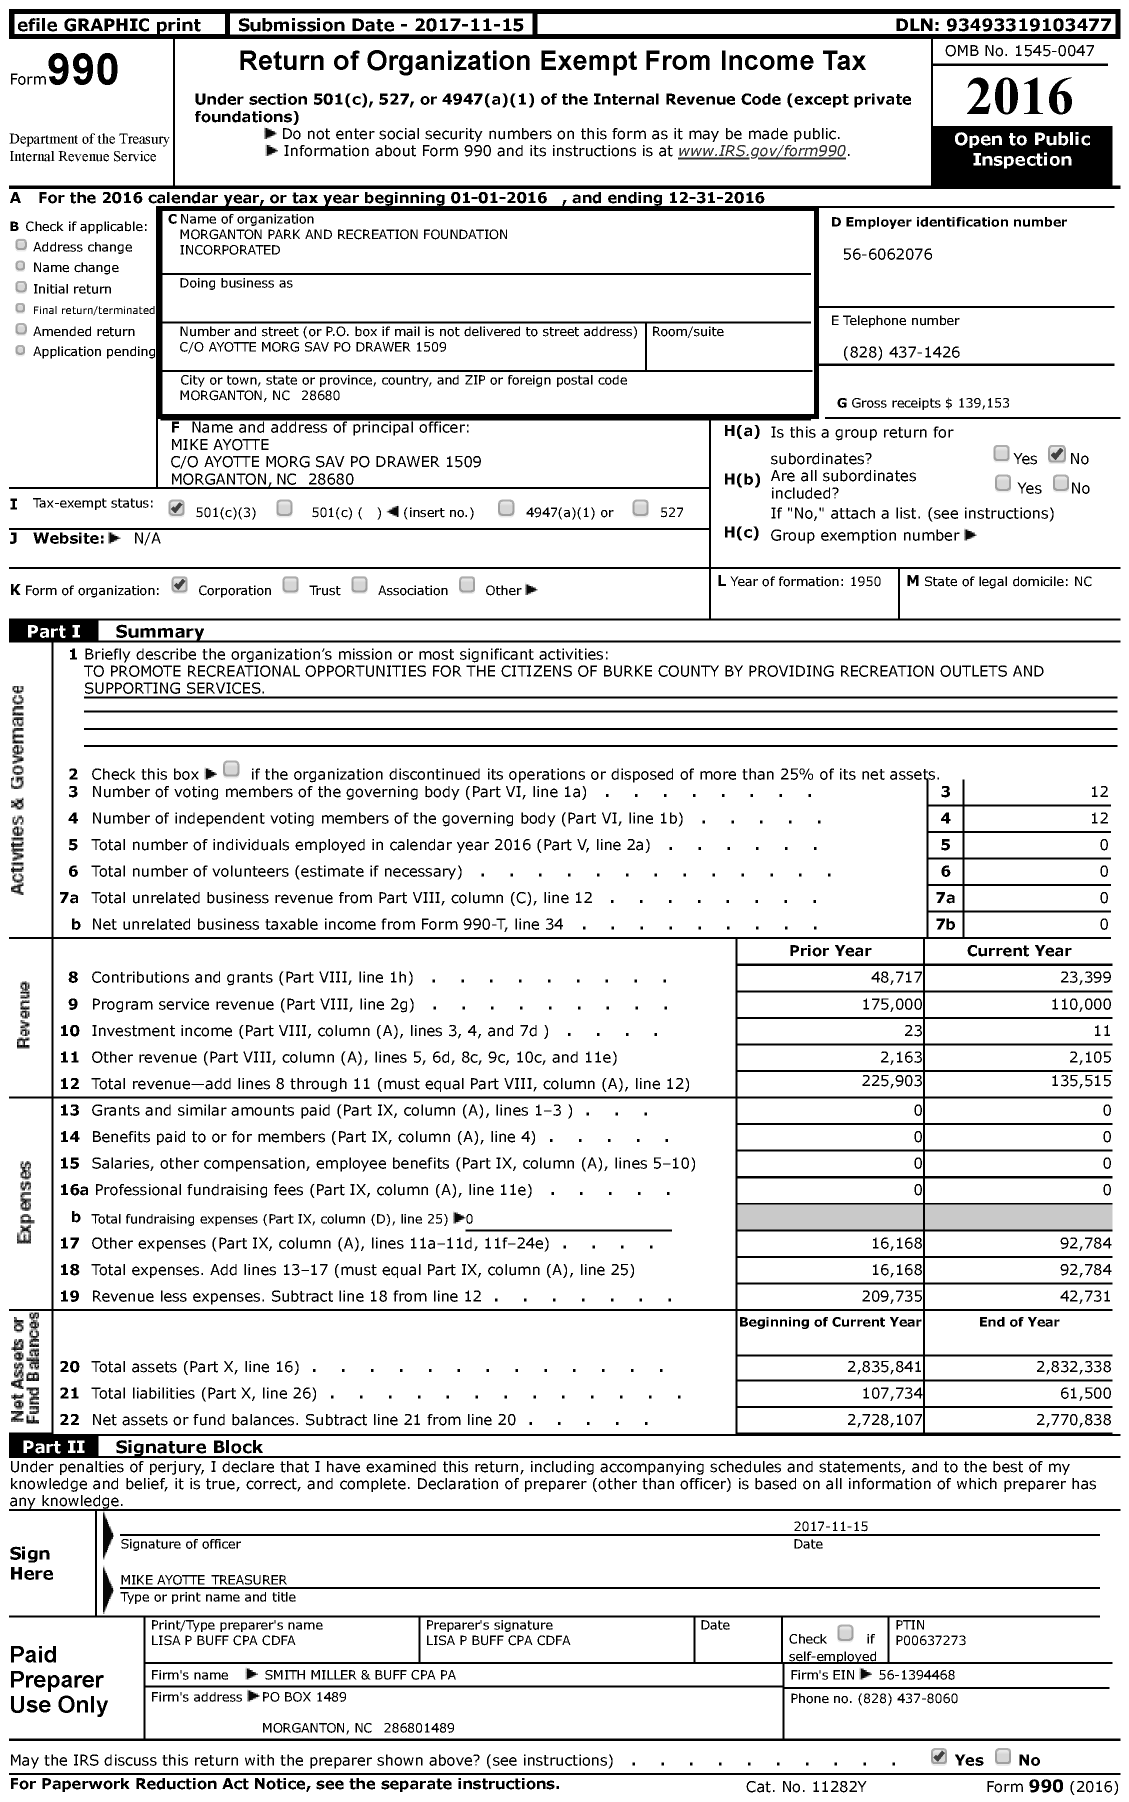 Image of first page of 2016 Form 990 for Morganton Park and Recreation Foundation Incorporated